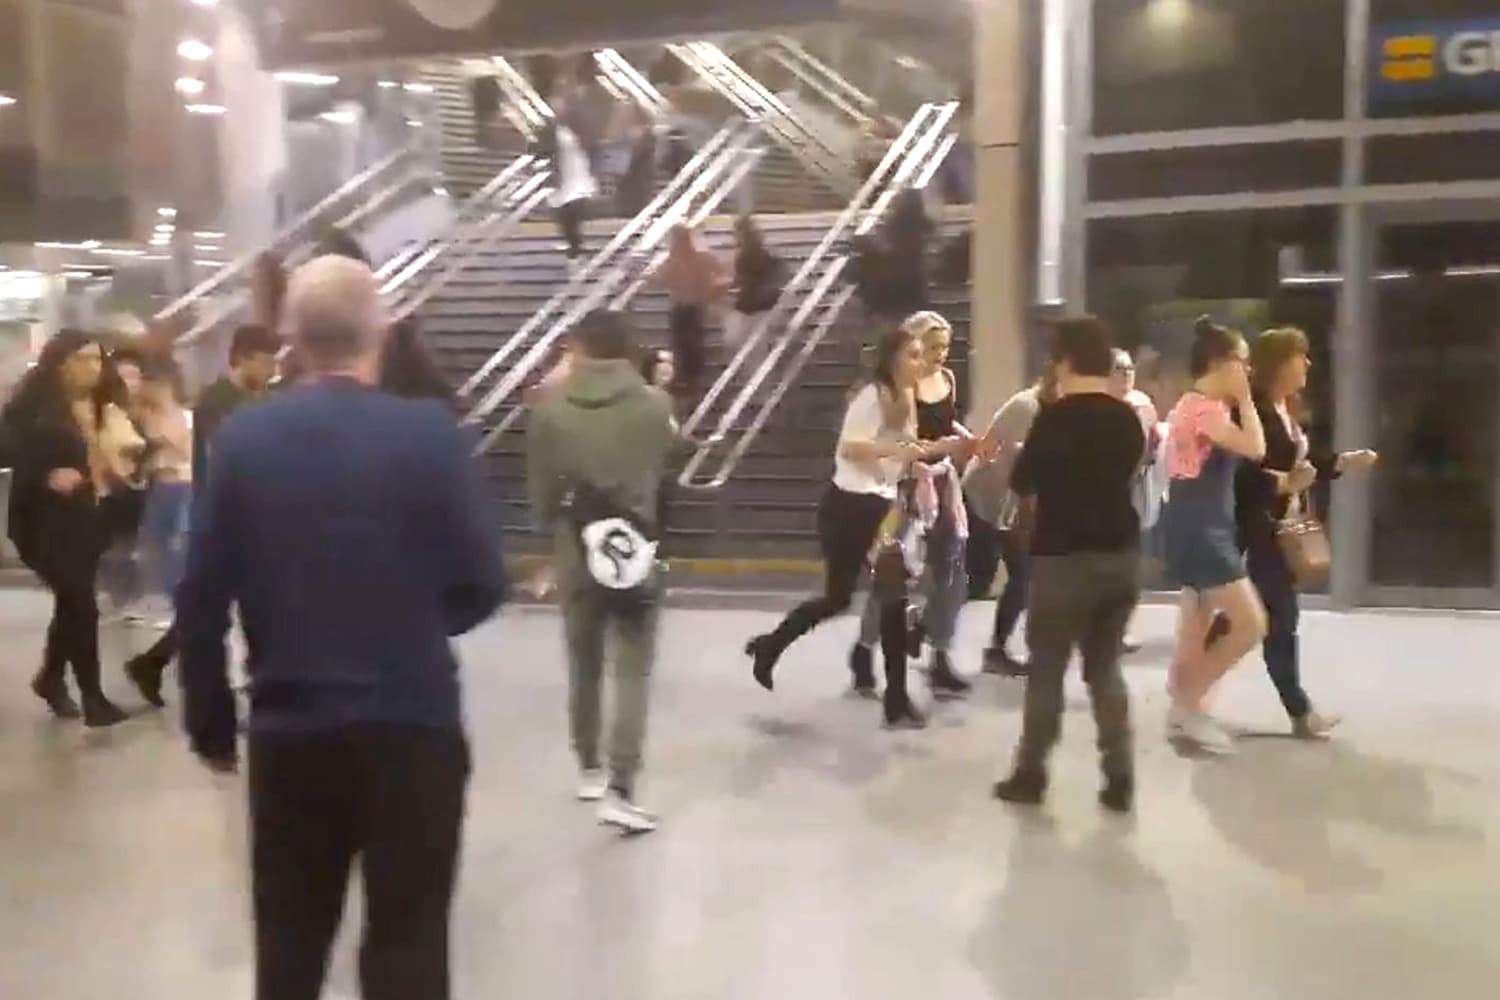 This image shows people running through Manchester Victoria station after an explosion at Manchester Arena. in Manchester England, Monday May 22, 2017. An apparent suicide bomber set off an improvised explosive device that killed over a dozen people at the end of an Ariana Grande concert on Monday, Manchester police said Tuesday May 23, 2017. The station is very near the arena. (Zach Bruce/PA via AP)